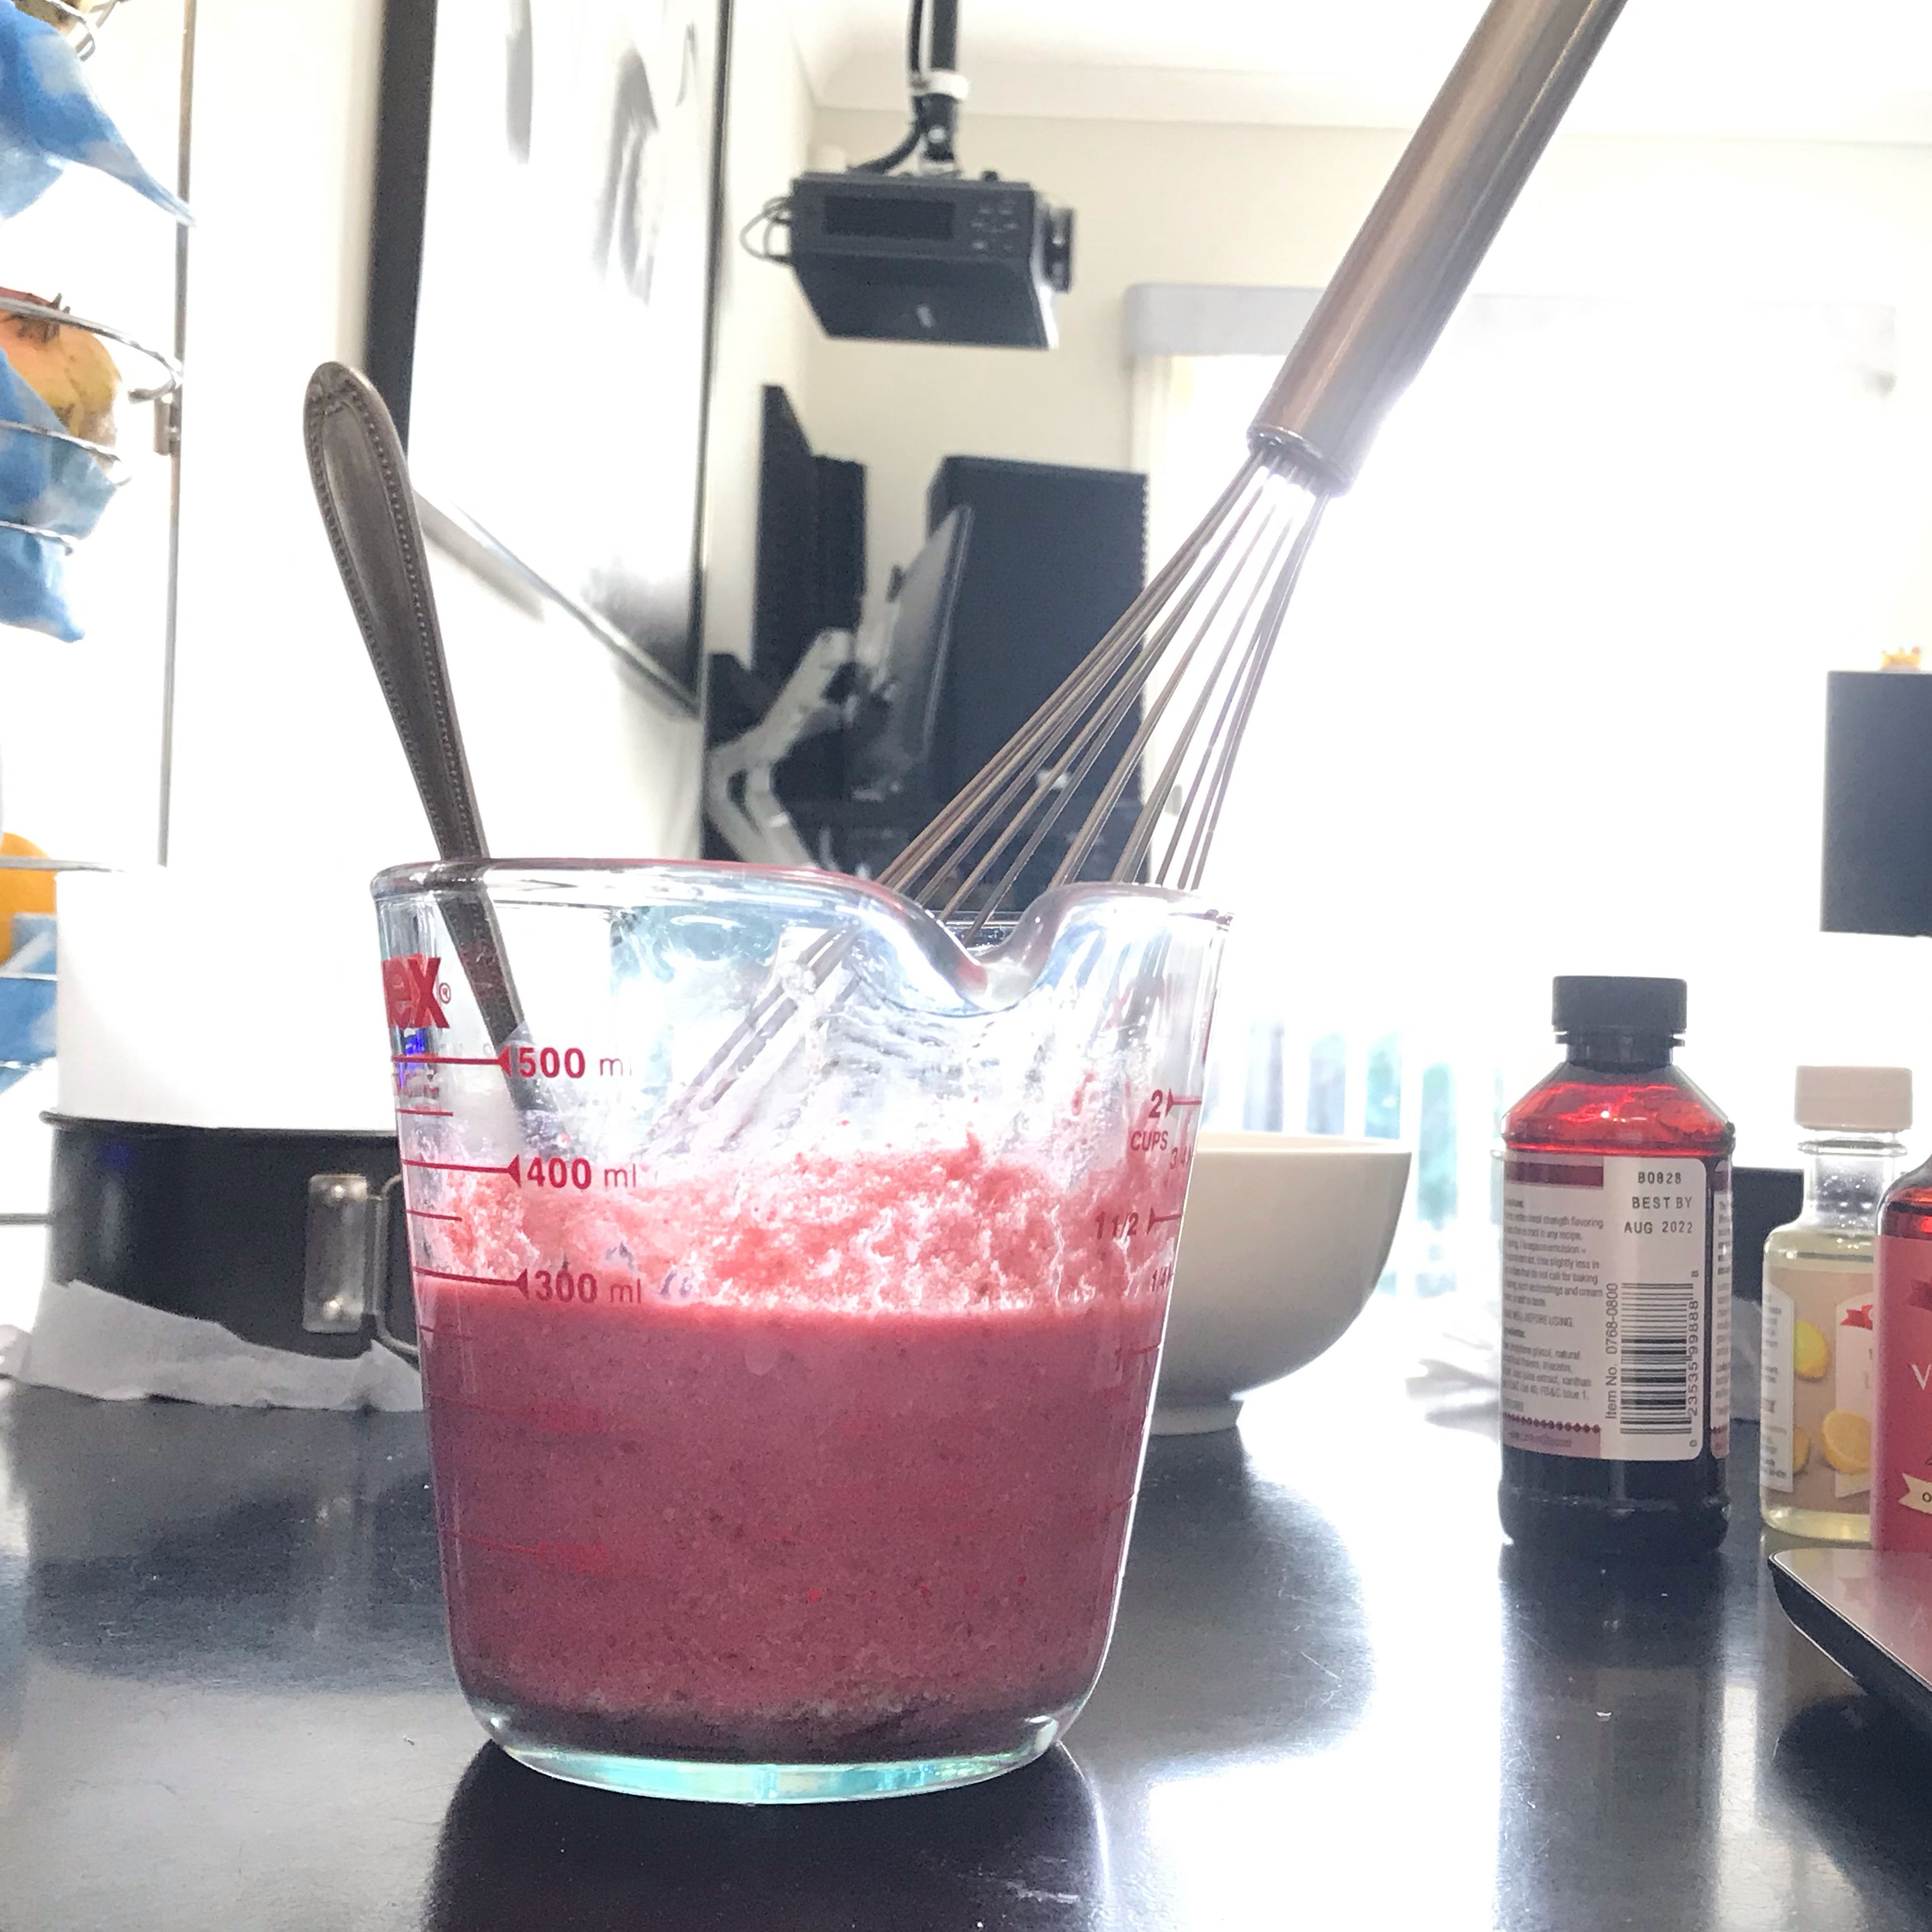 In a separate jug or medium bowl, whisk together the milk, strawberry reduction, strawberry emulsion, vanilla extract, lemon extract, lemon zest, lemon juice, and pink food coloring.